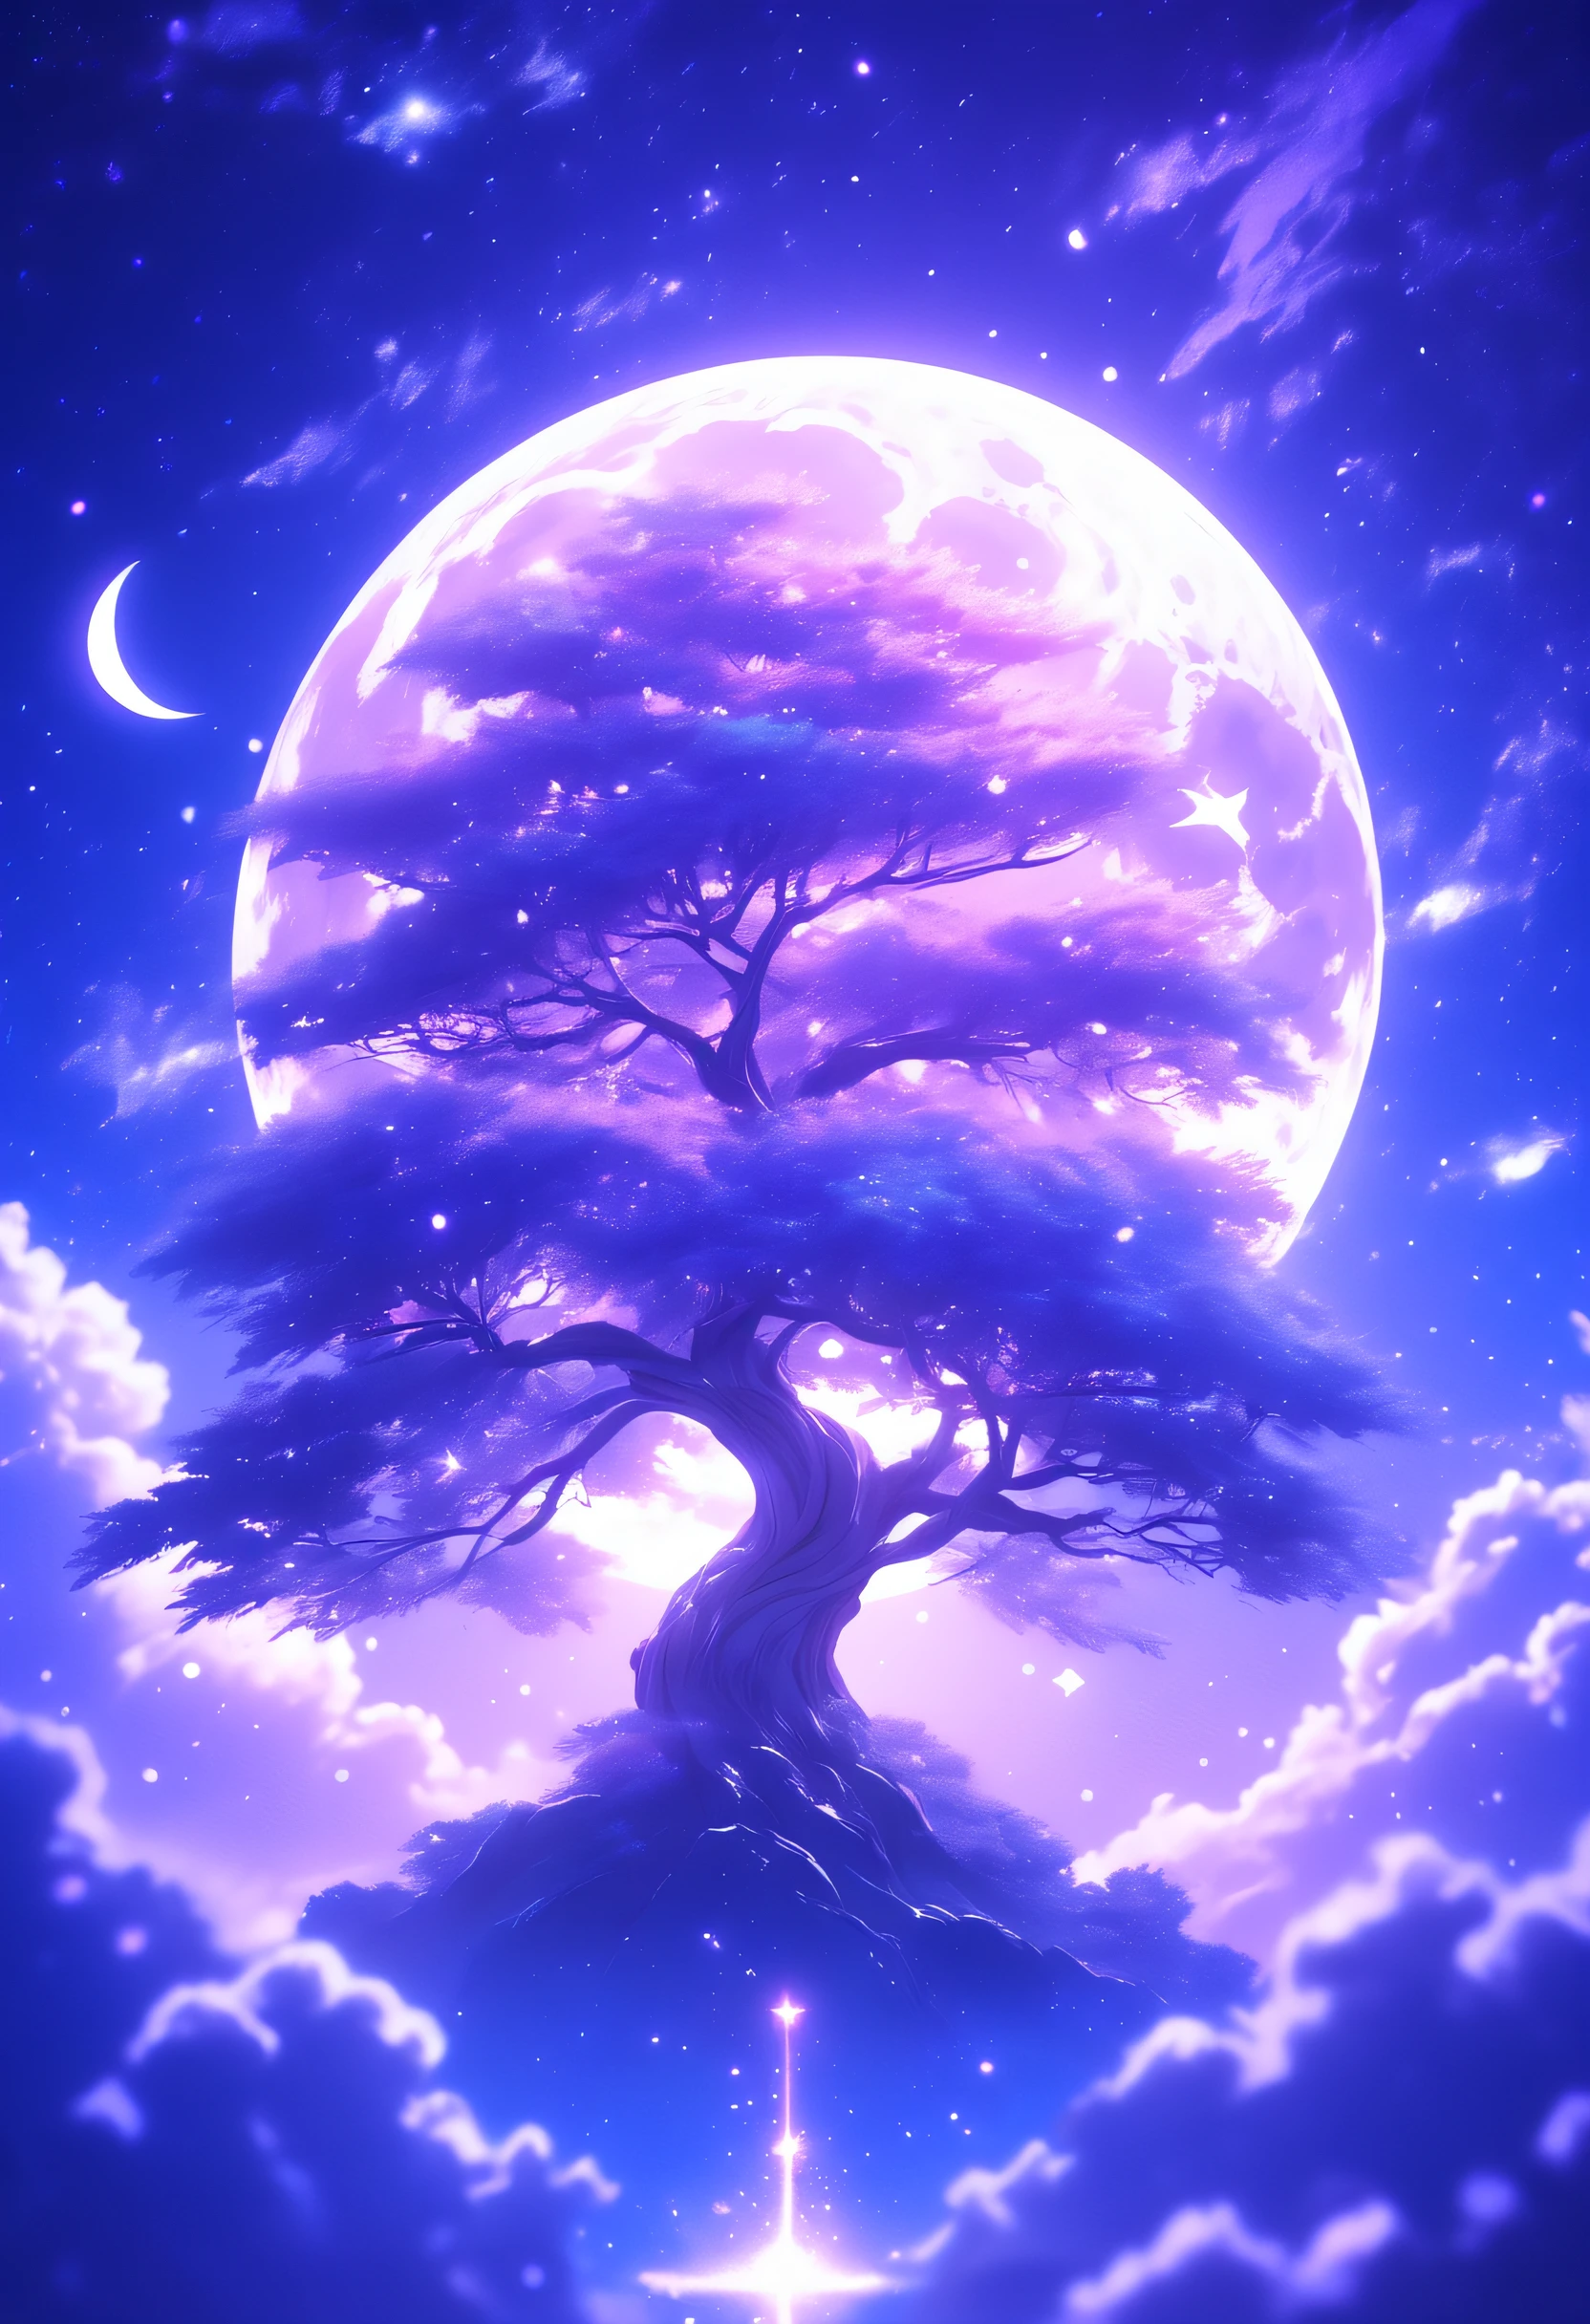 A tree in space，moon on sky, Light violet and light indigo style, Anime art, nightcore, Fantastic collage, glimmering, UHD image, zen buddhism influence,Dreamy,16k